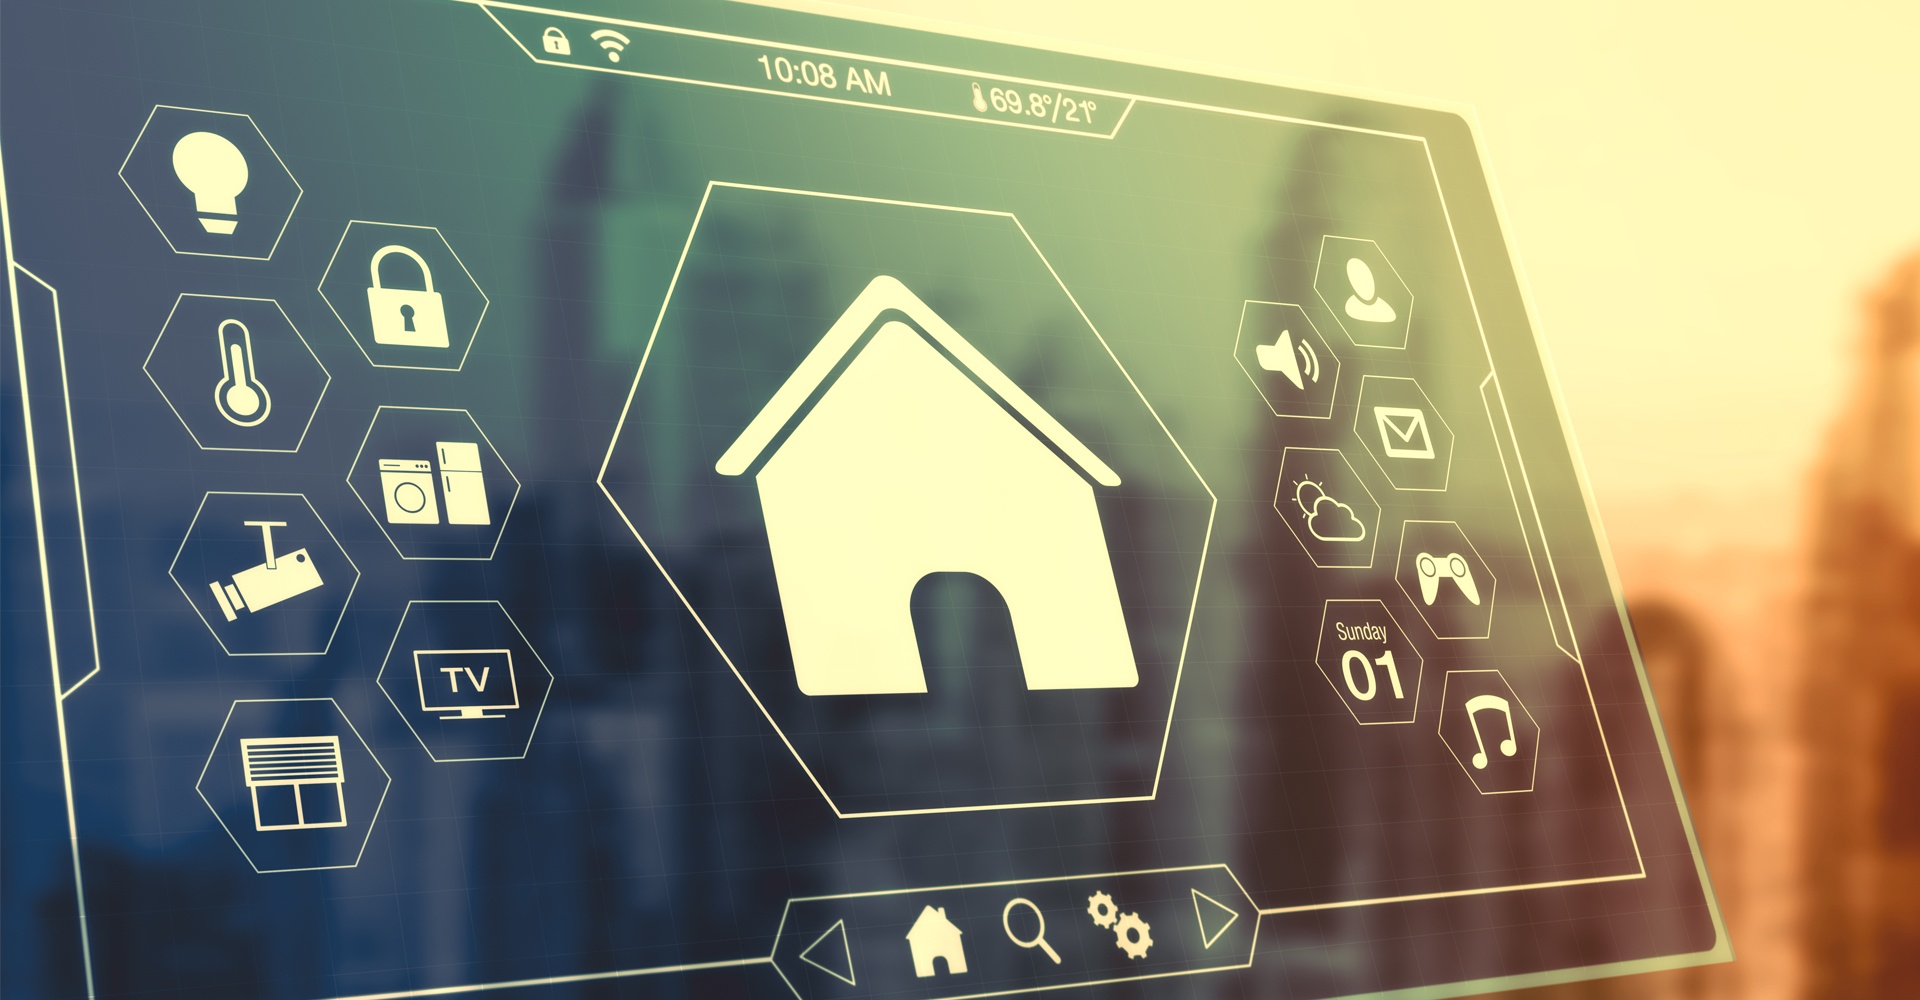 Can Your Smart Home Security Be Hacked?